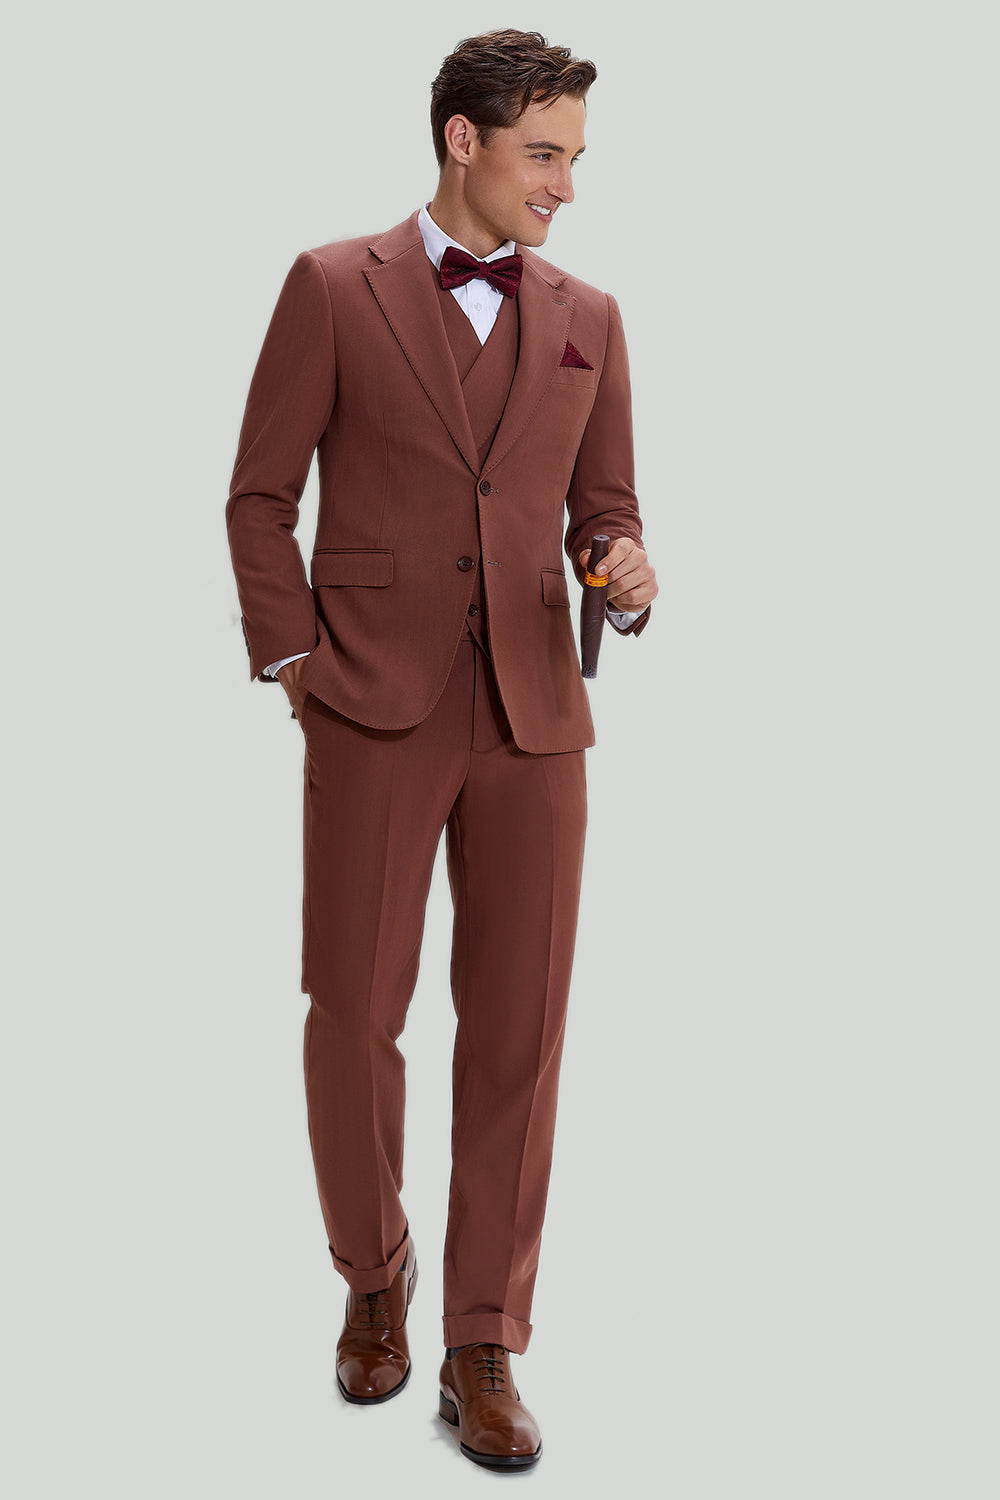 Tan Notched Lapel 3 Piece Single Breasted Prom Suits